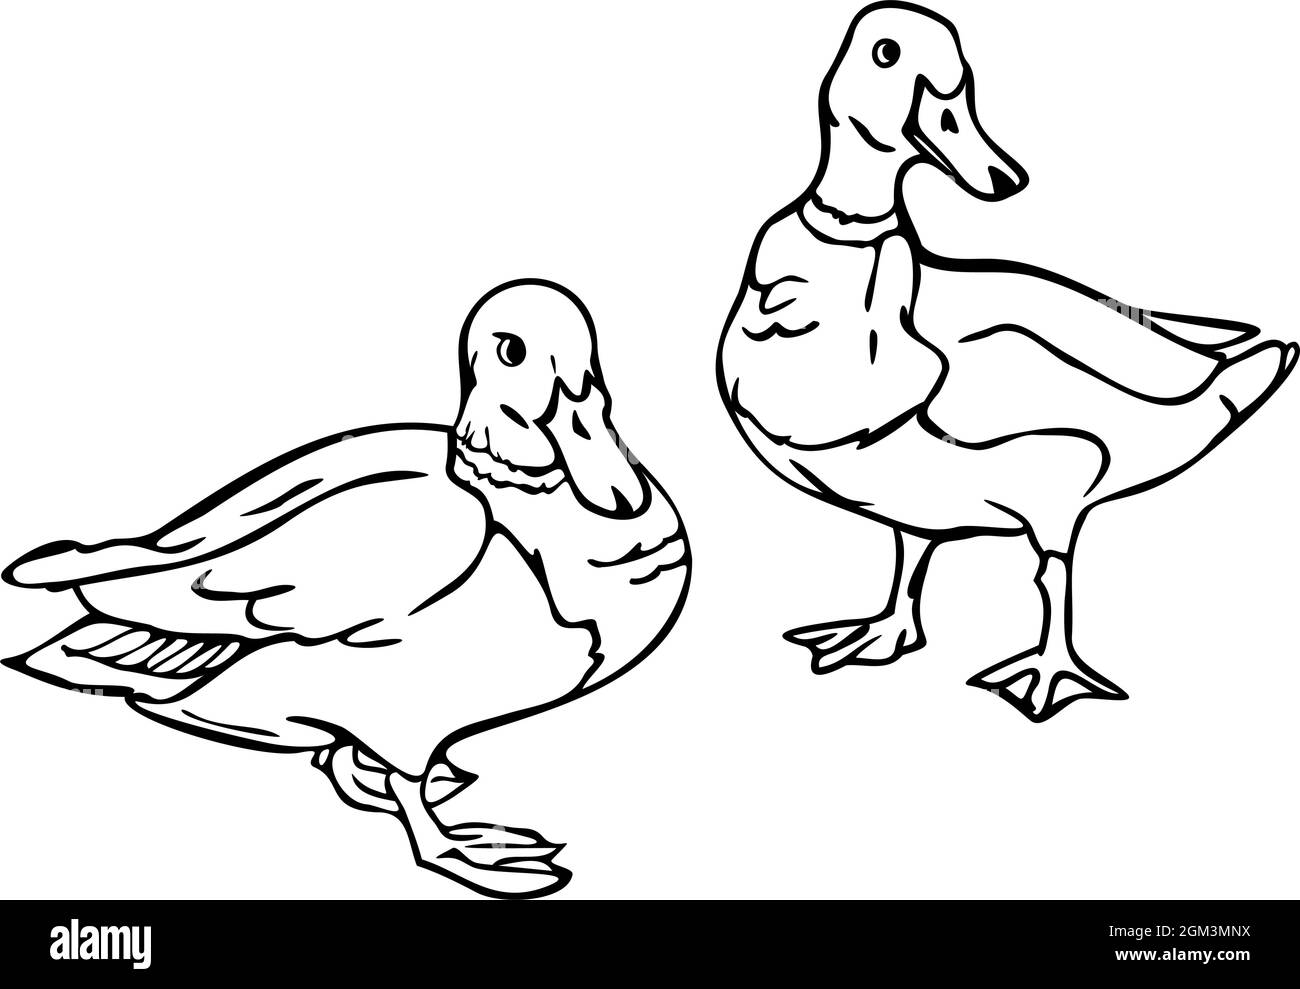 Vector illustration with outlines of ducks. Two black and white wild ducks. Stock Vector